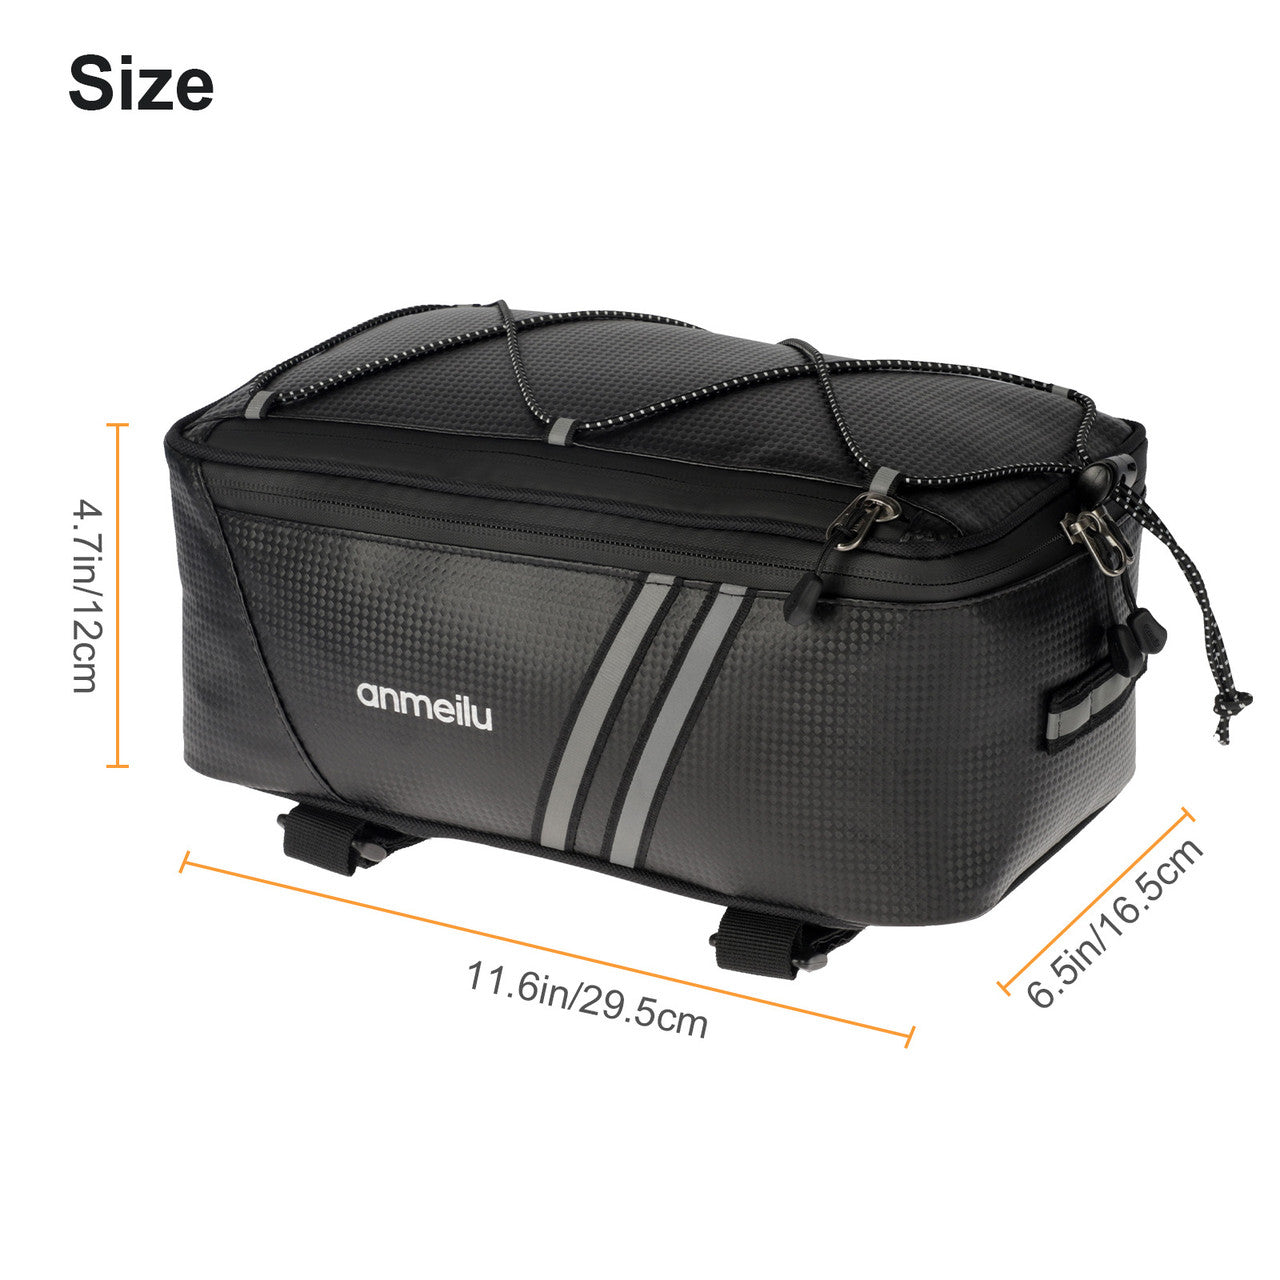 Bicycle Rear Seat Storage Bag for Local and Mid-Range Distances